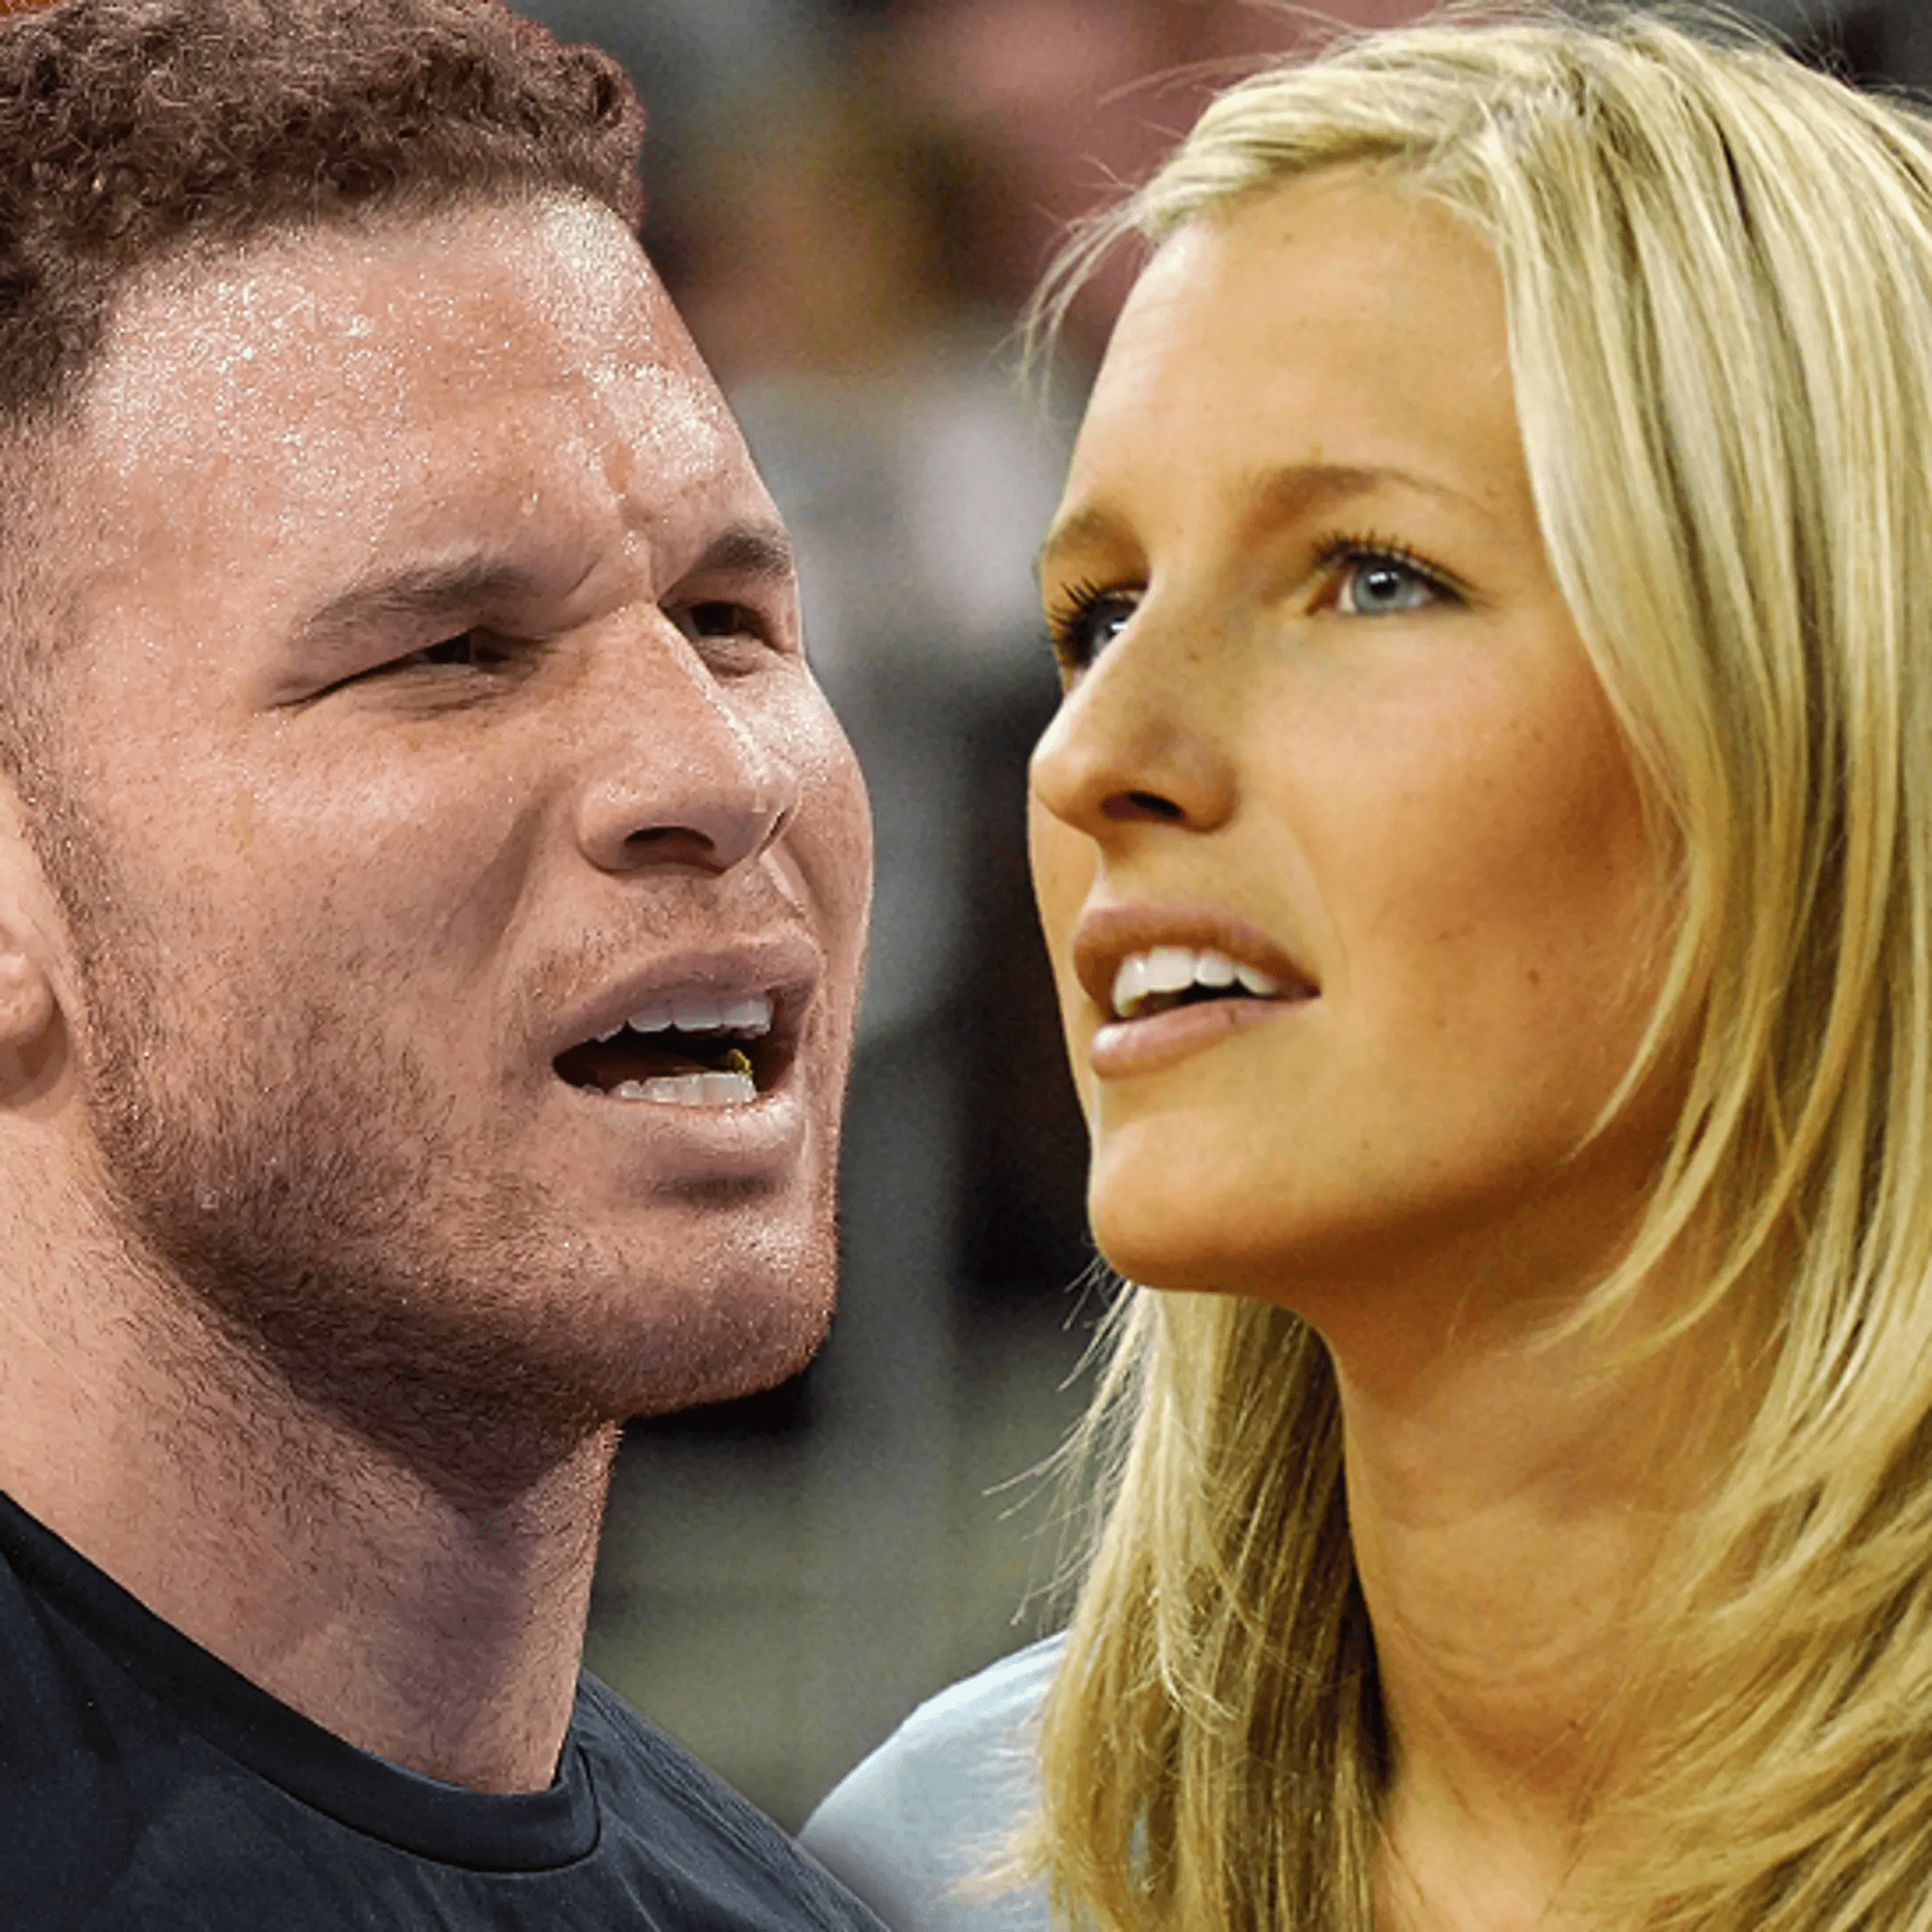 Blake griffin Wife, girlfriend, and dating history